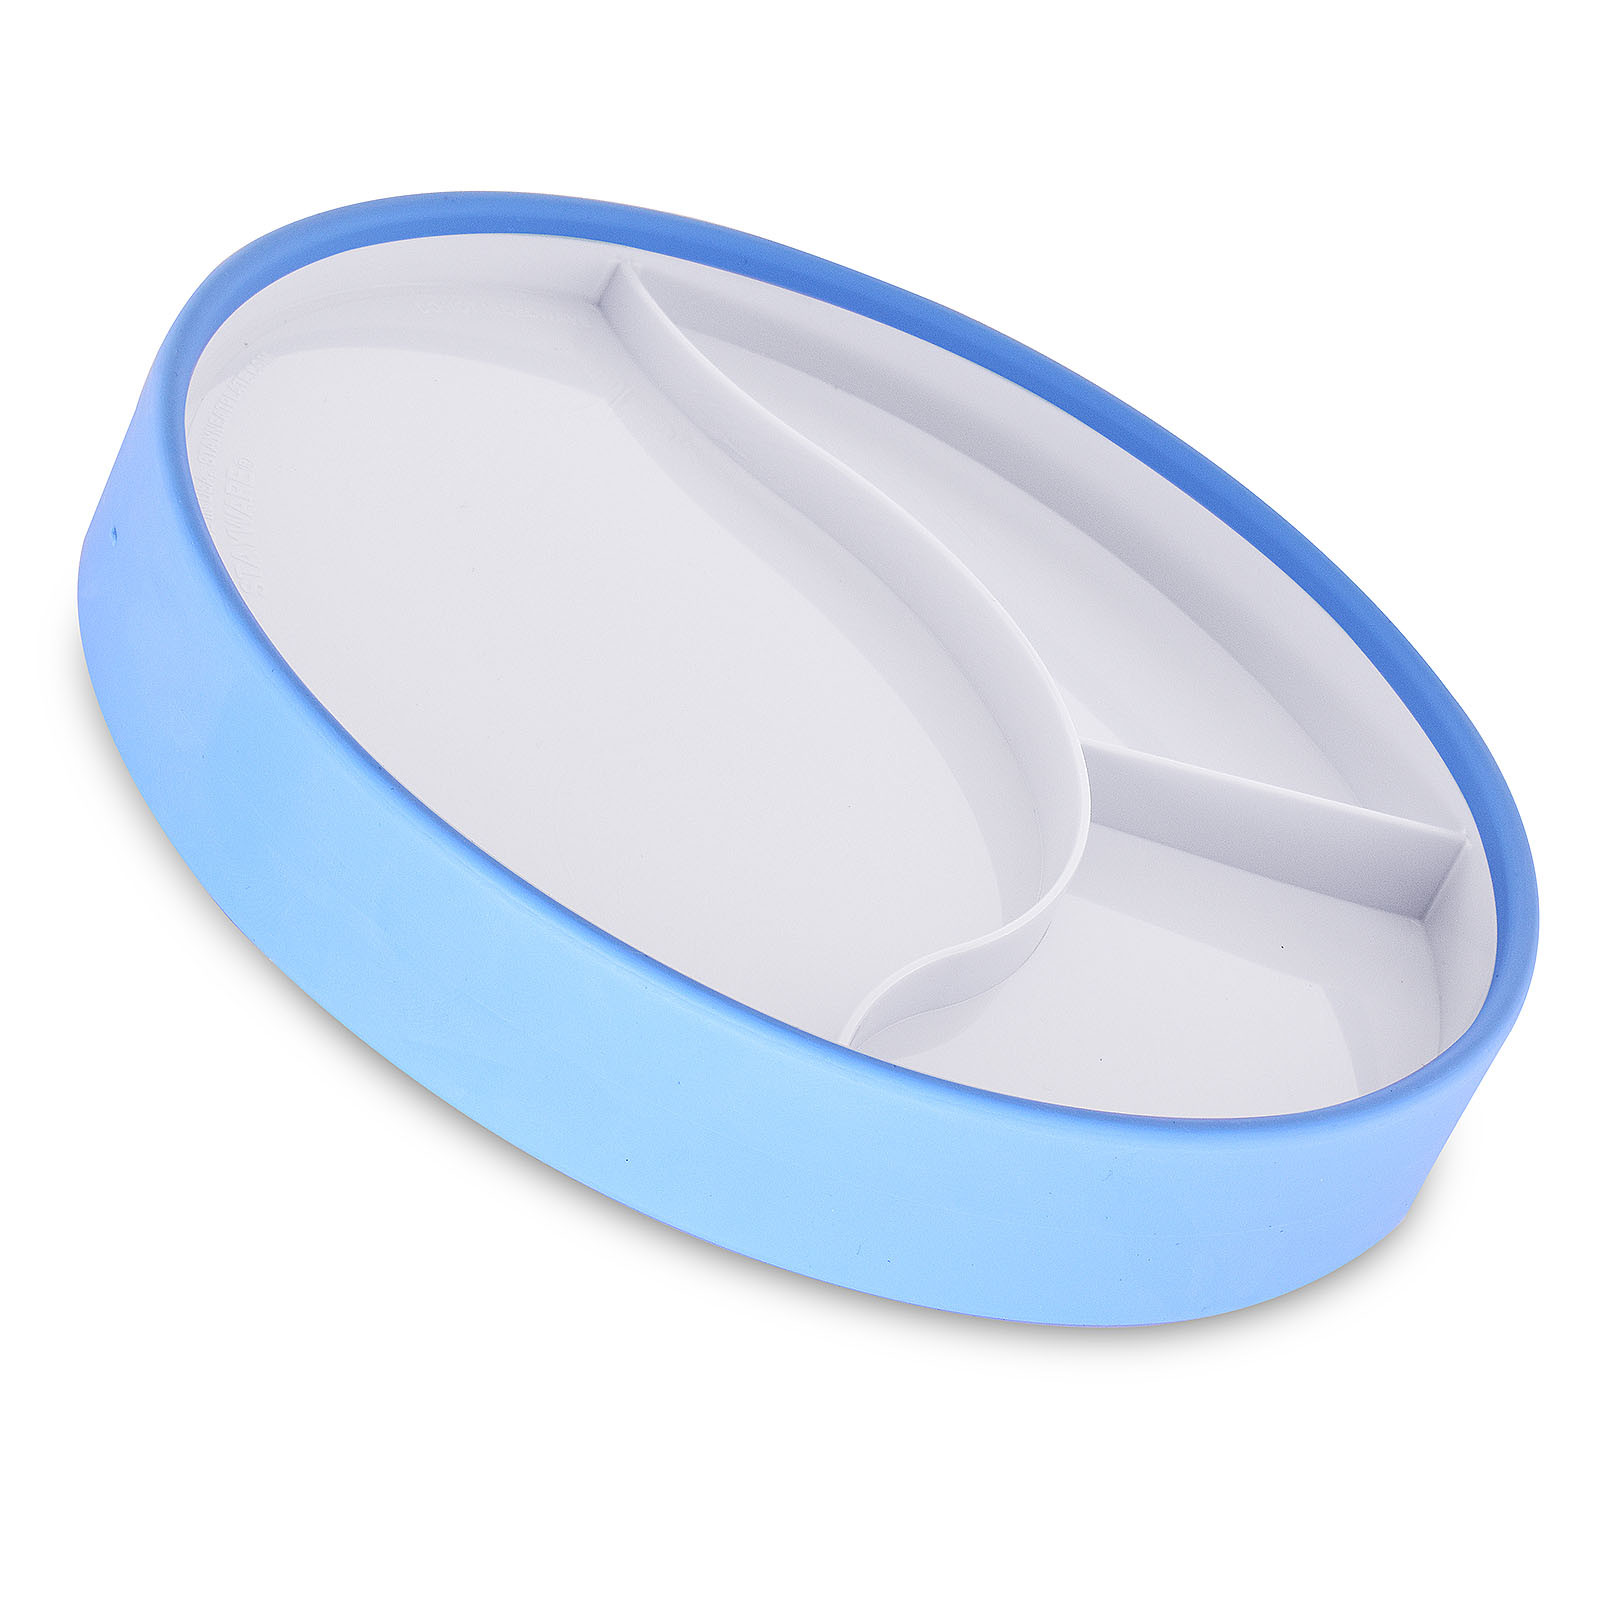 STAYnEAT Reversible Suction Plate